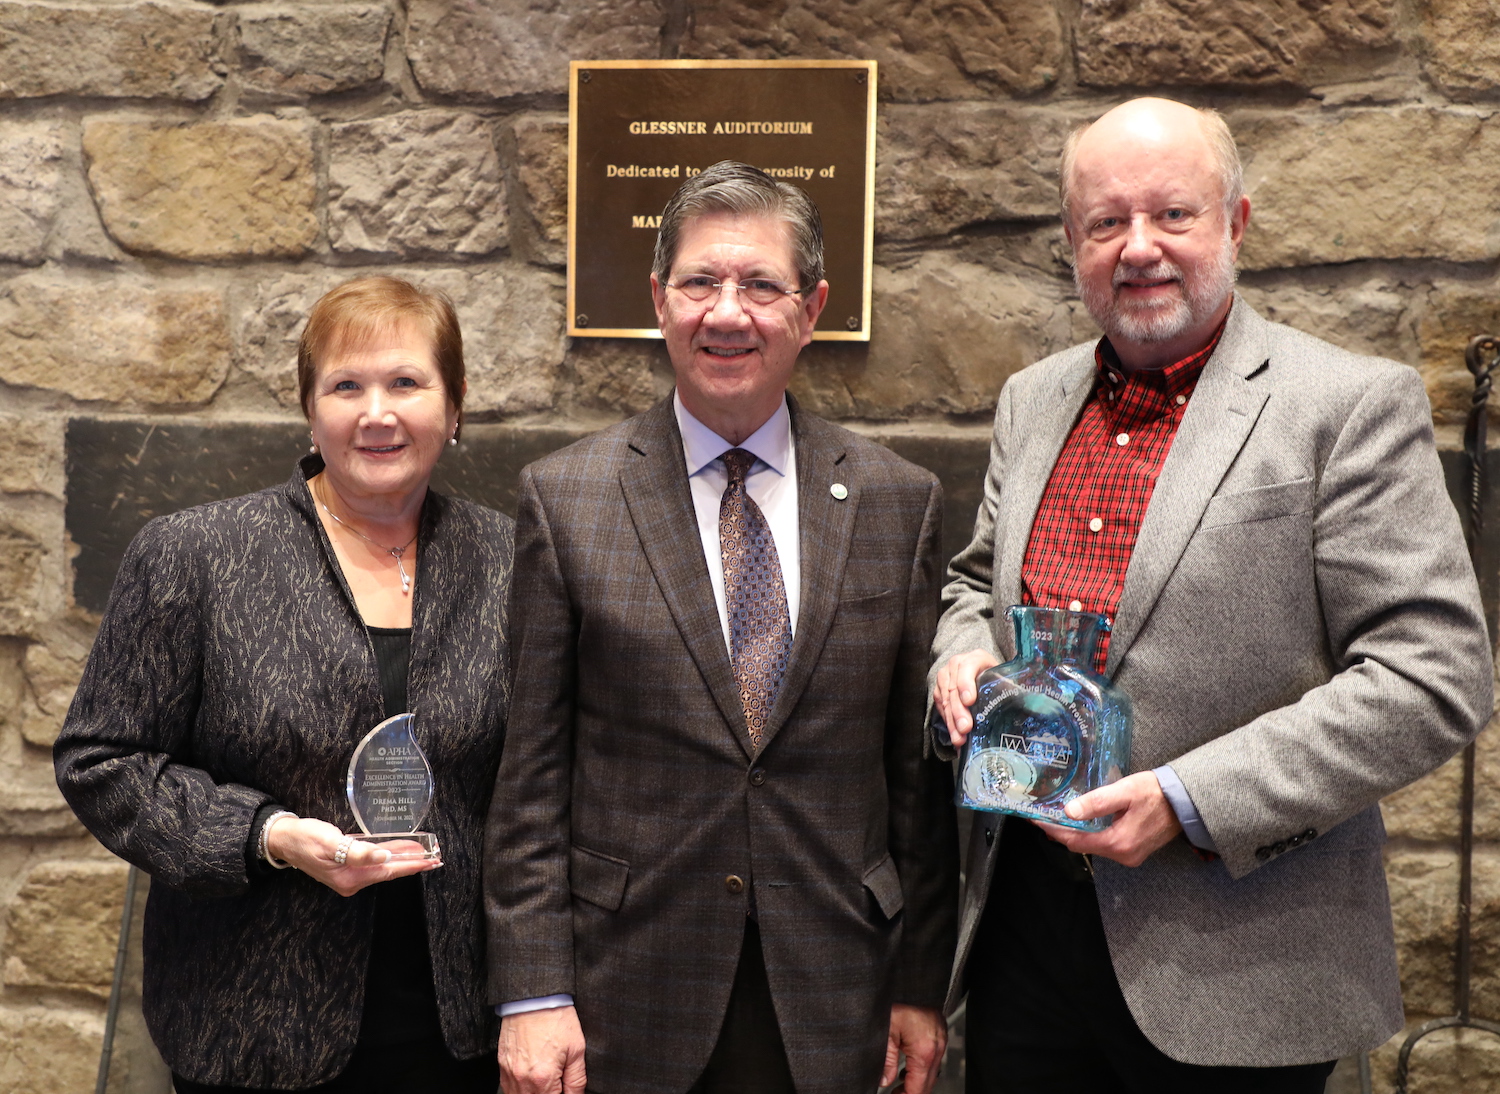 Three WVSOM representatives: Vice President Drema Hill, President James Nemitz, and Dr. Mark Waddell join for a photo in honor of Hill's and Waddell's awards. 